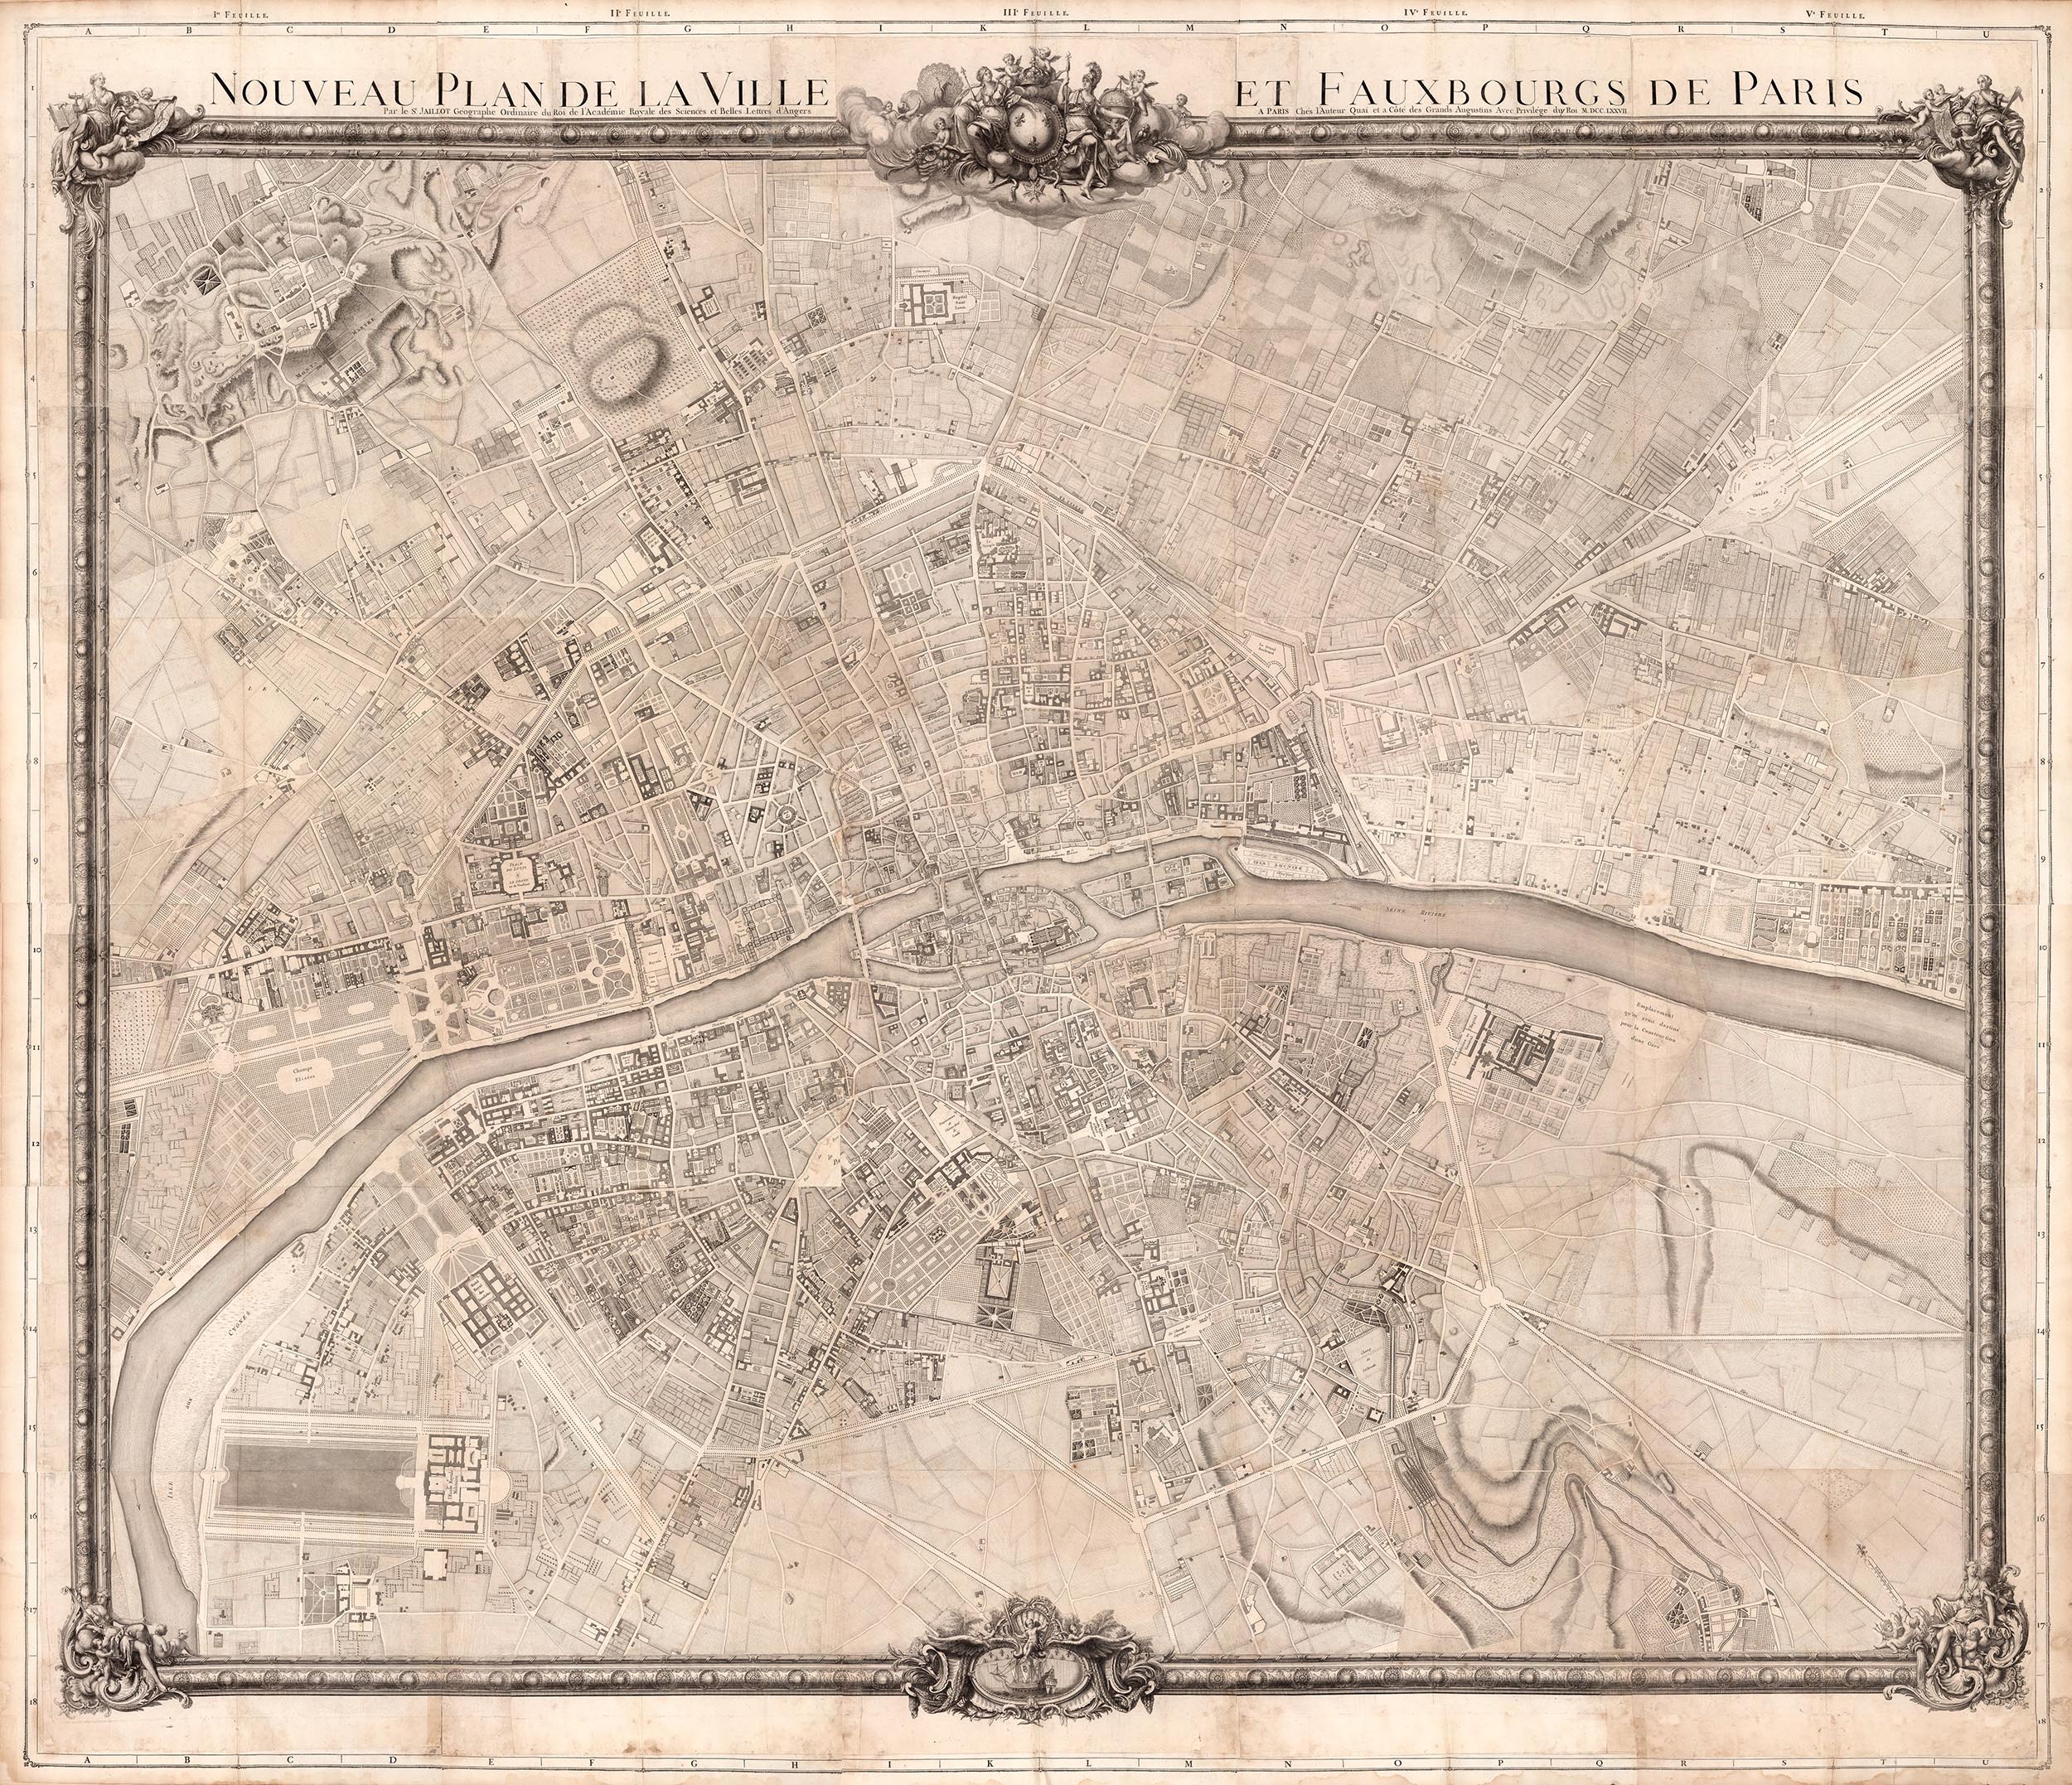 David Rumsey Historical Map Collection | Categories